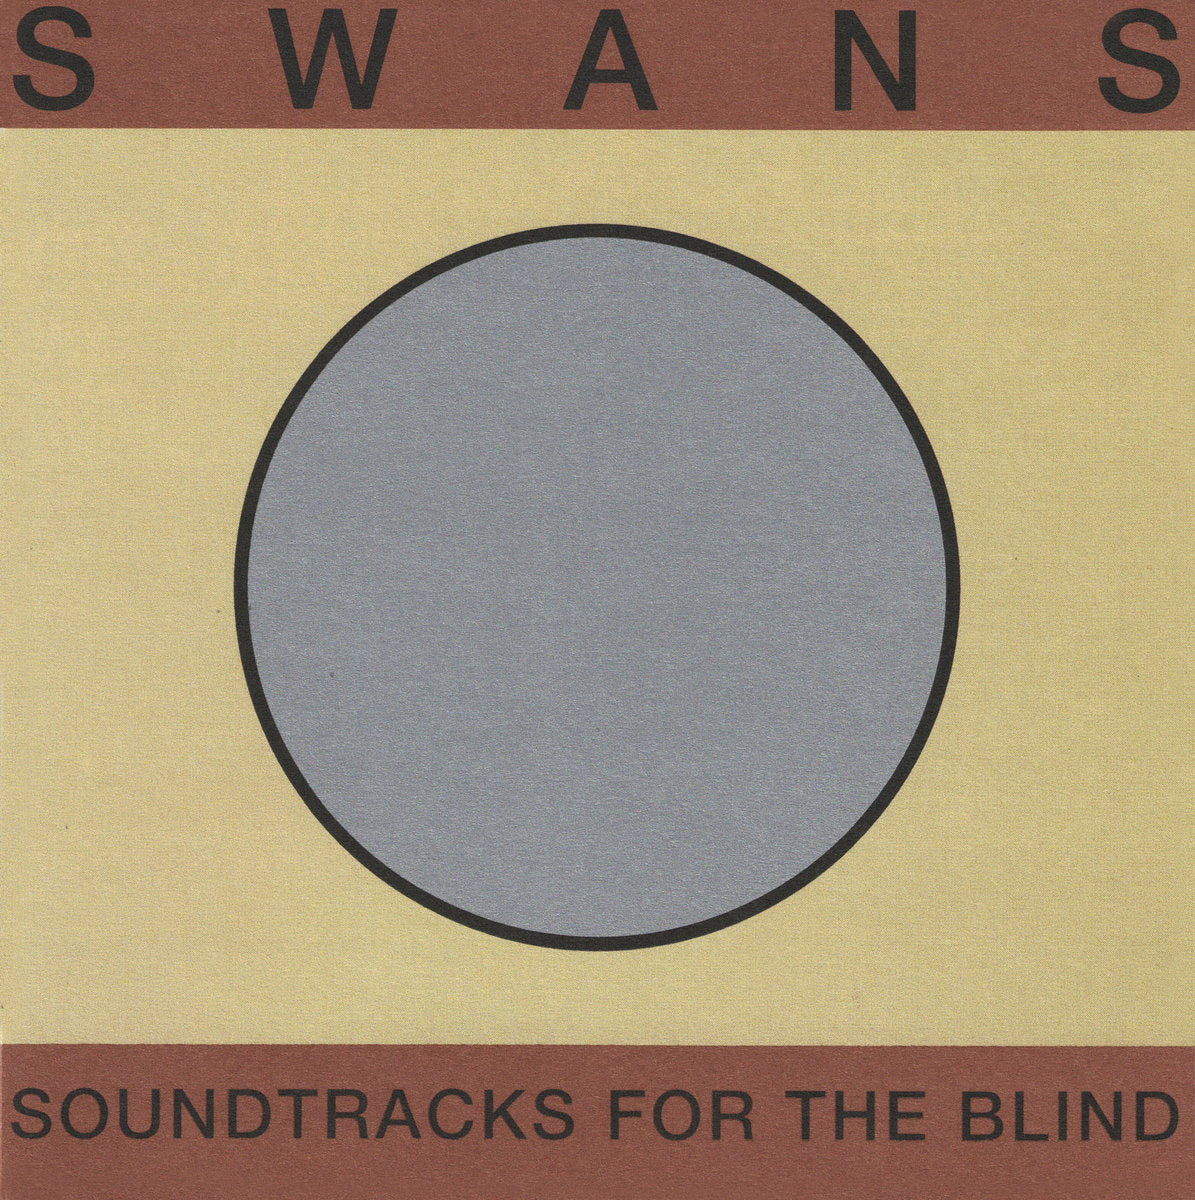 SWANS "Soundtracks For The Blind" 3xCD